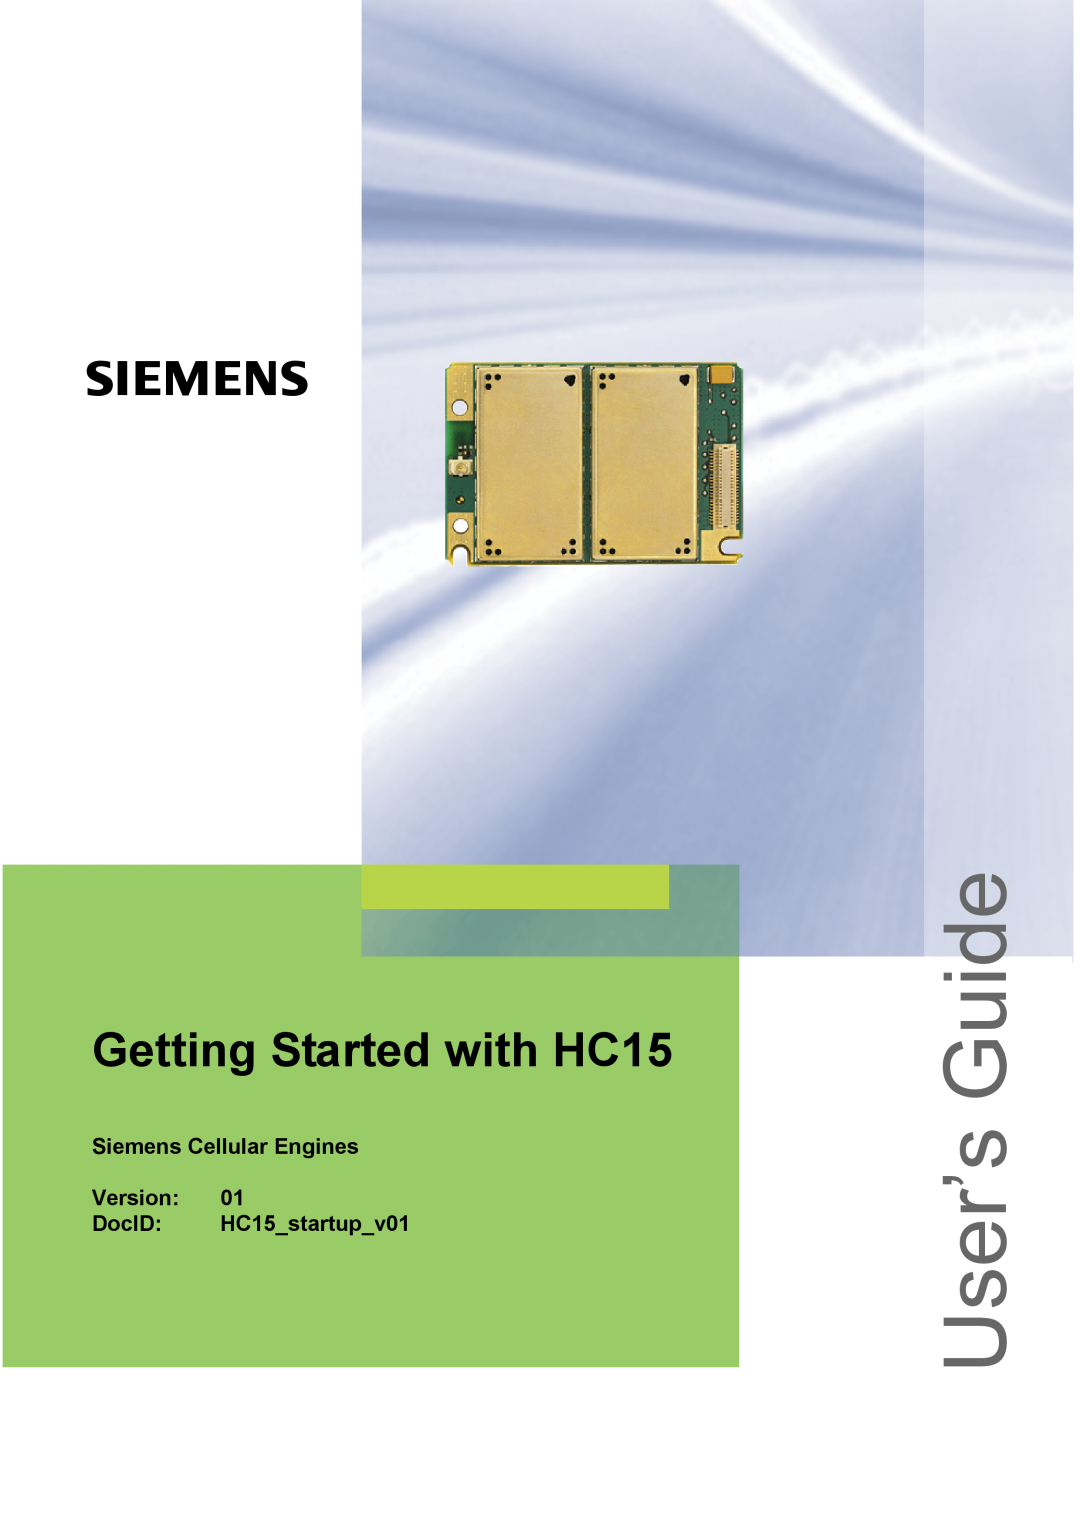 Siemens manual User’s Guide, Getting Started with HC15, Siemens Cellular Engines Version DocID HC15startupv01 